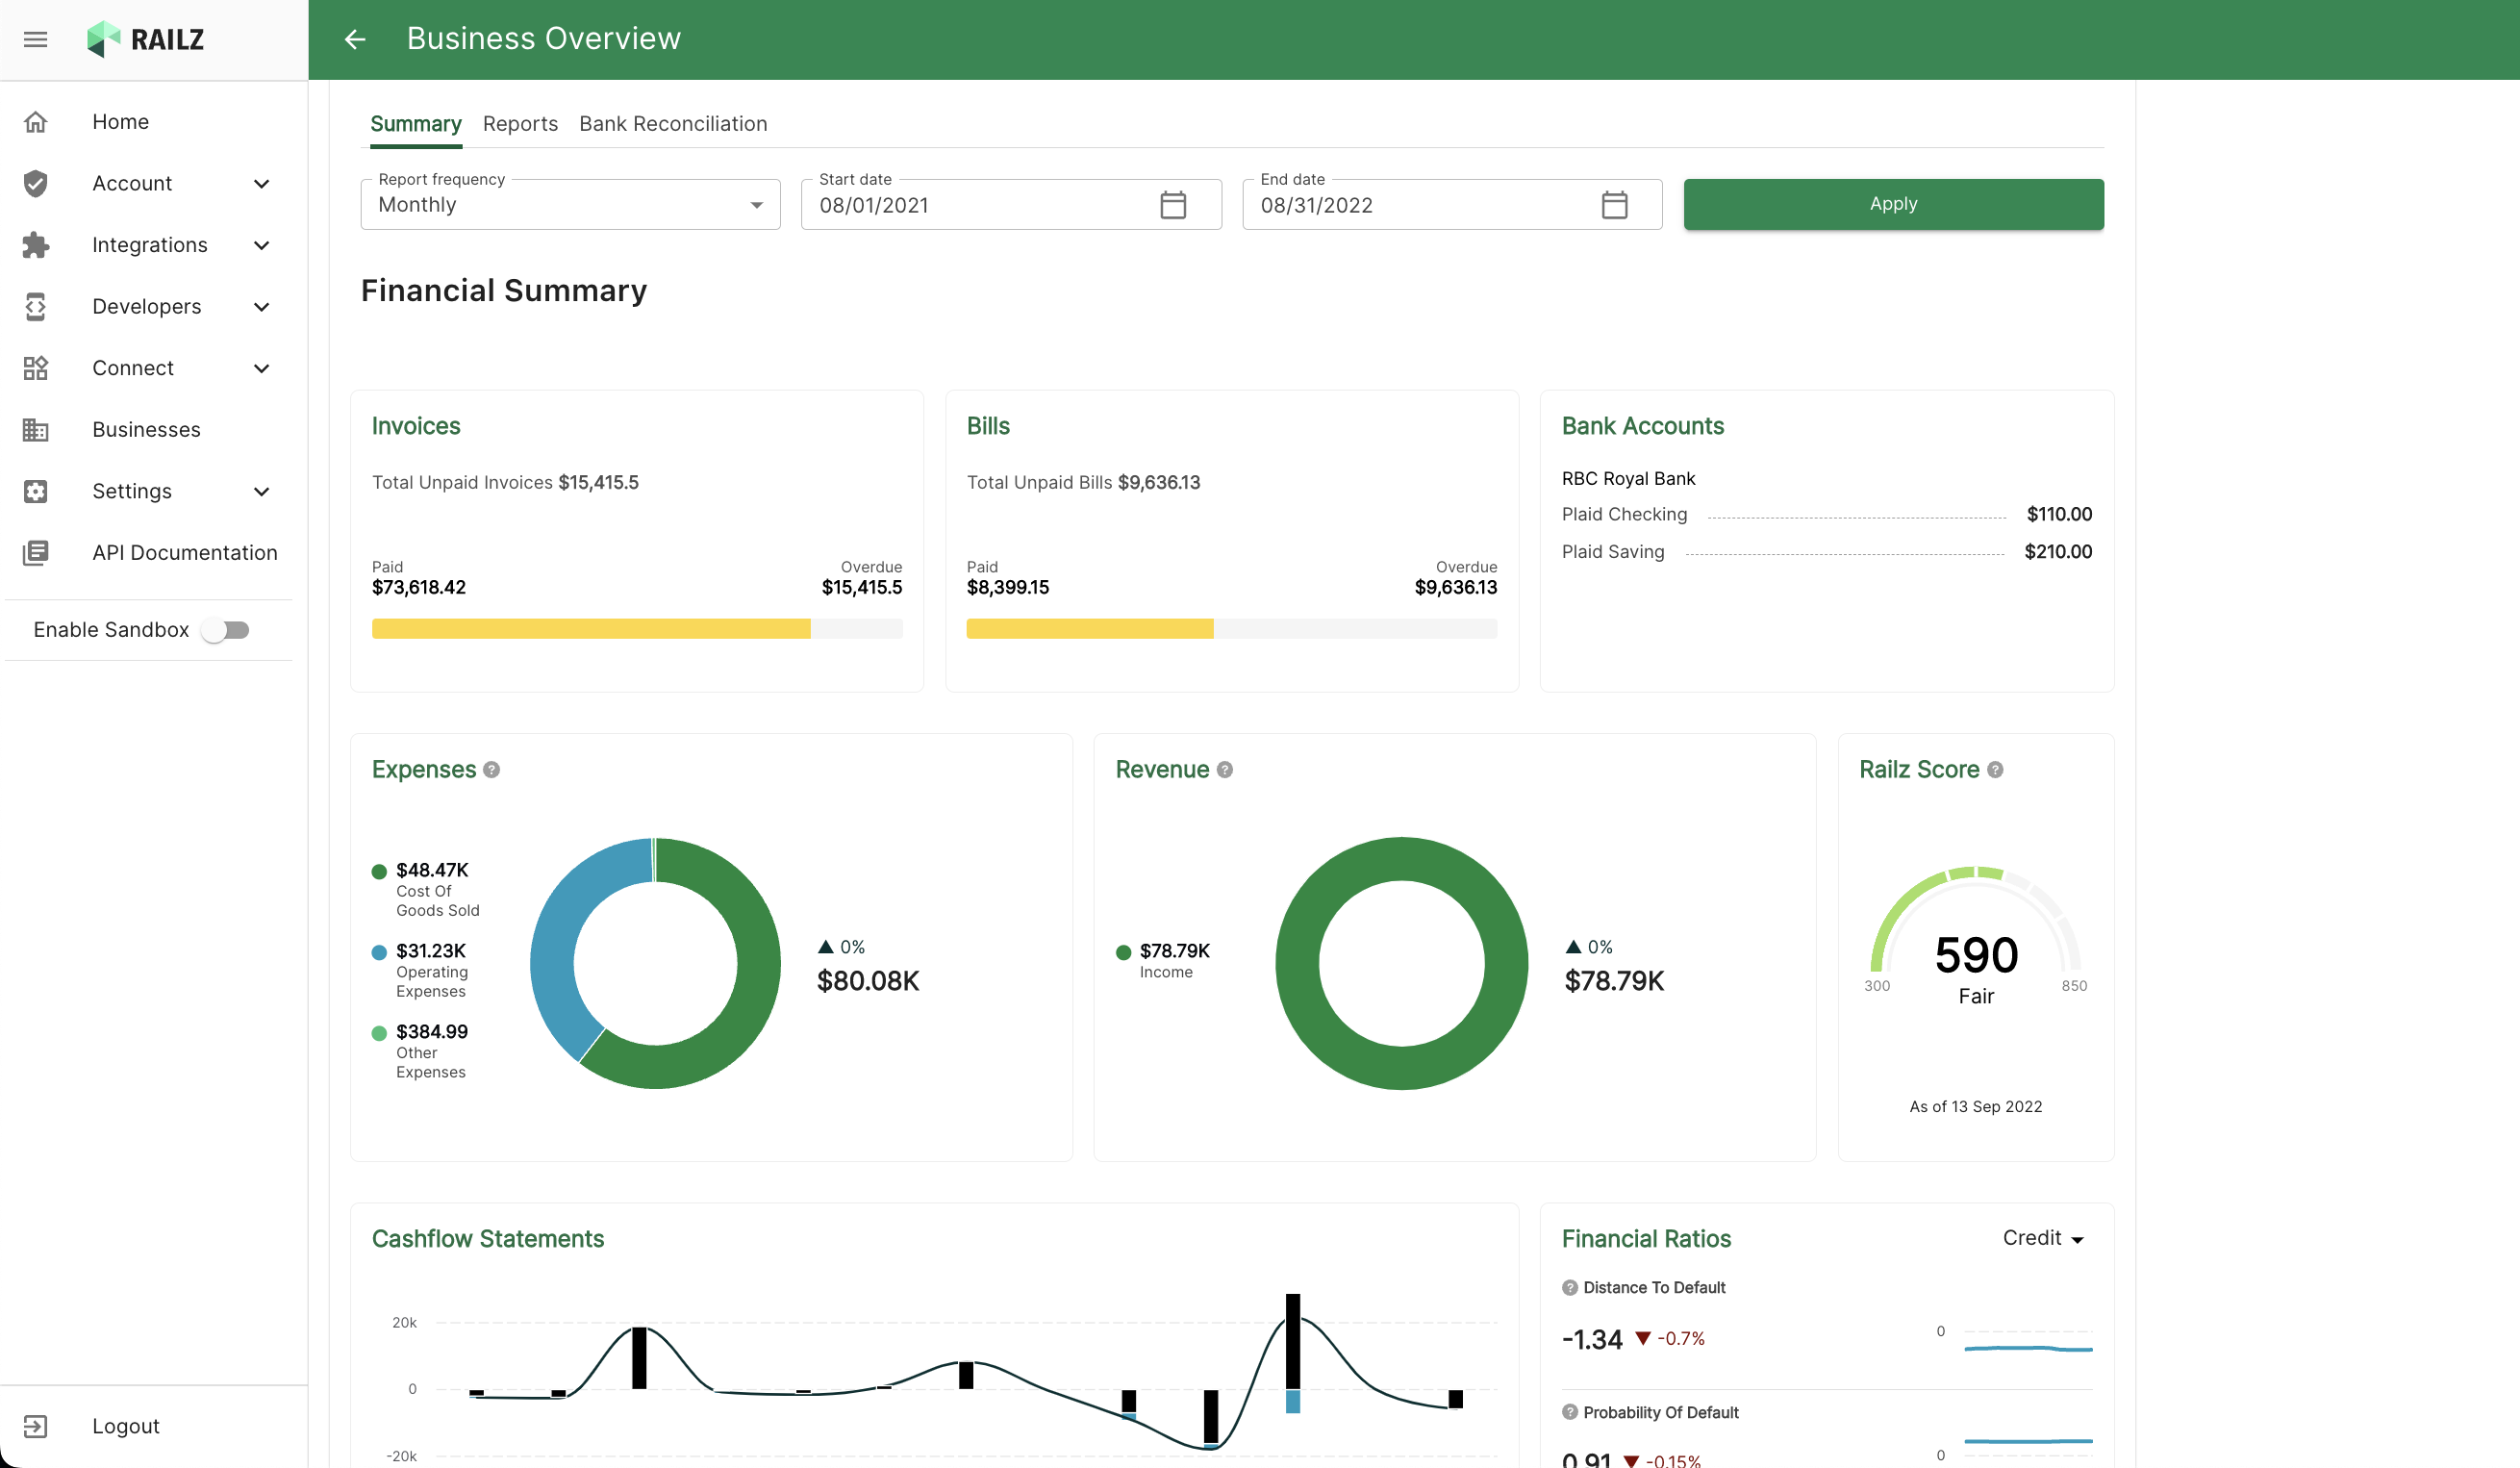 Railz Dashboard - View Business Data. Click to Expand.